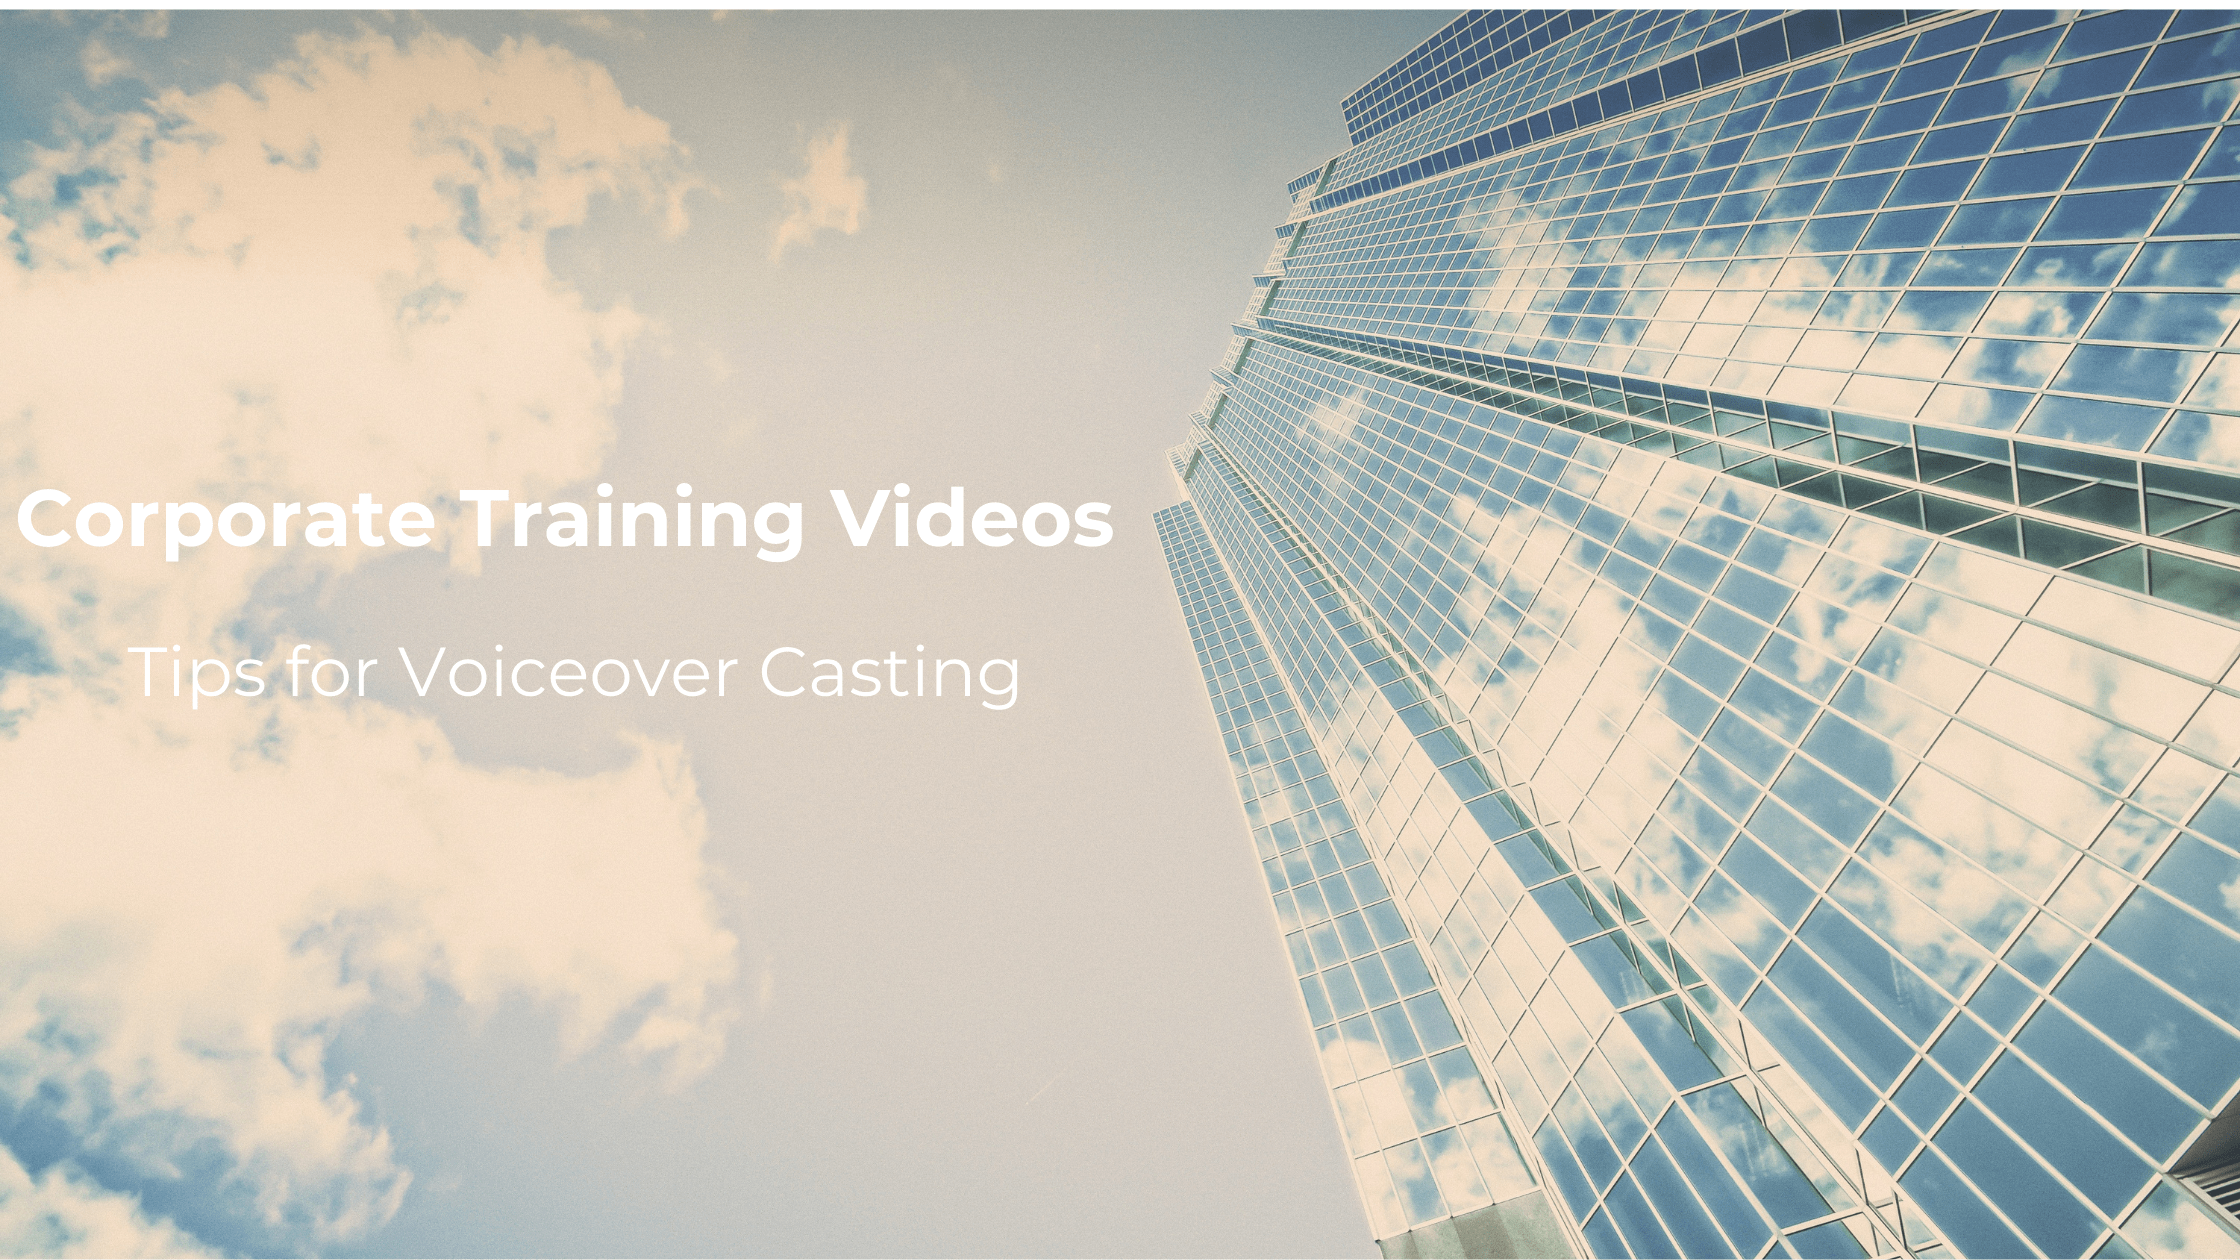 Corporate Training Videos - Tips for Voiceover Casting